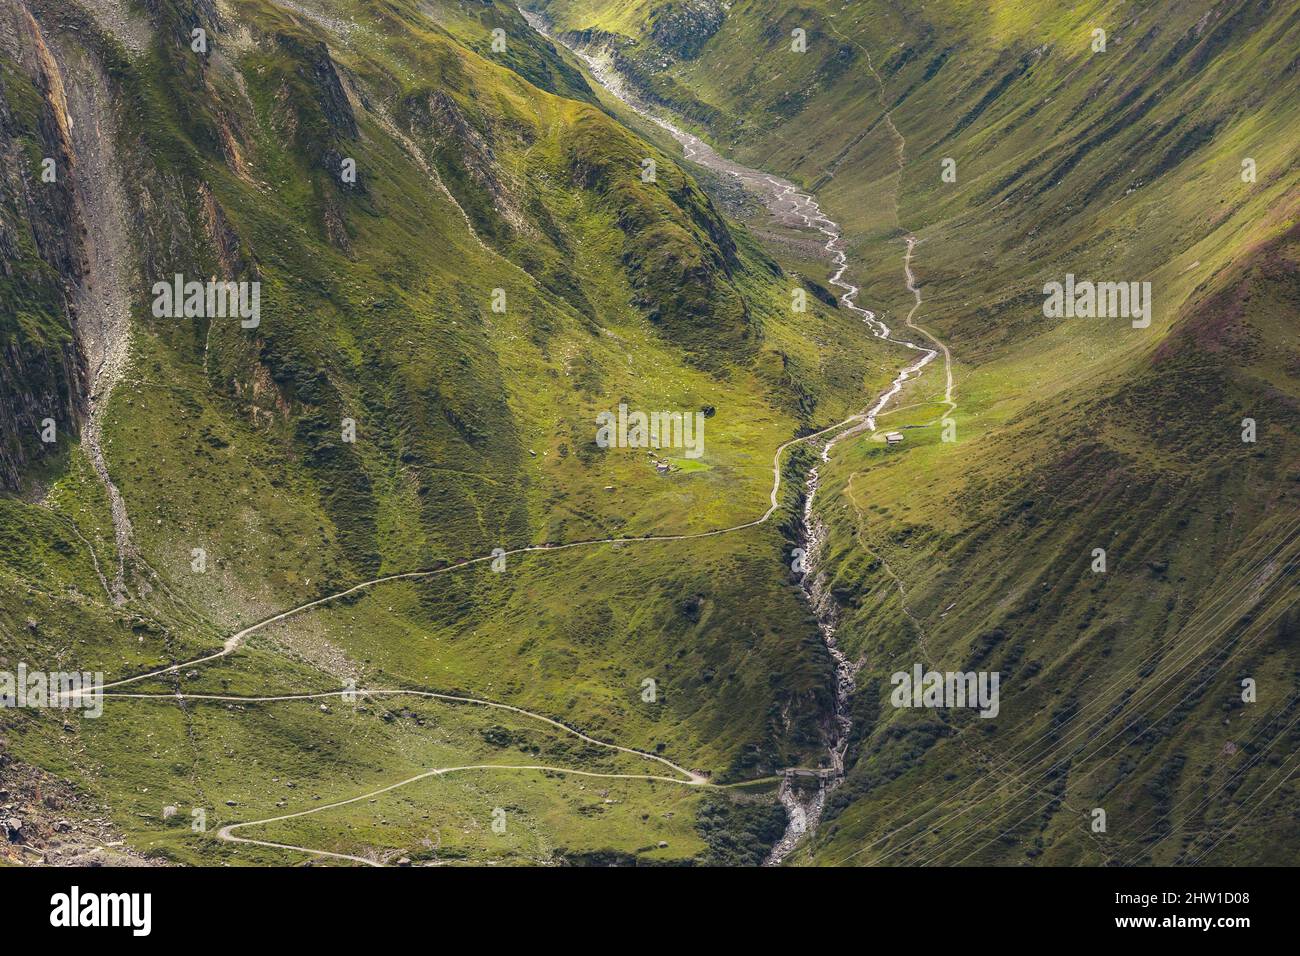 Switzerland, canton of Ticino, Ulrichen, Nufenen pass, elevated view of the Agene river valley, near Gries dam Stock Photo